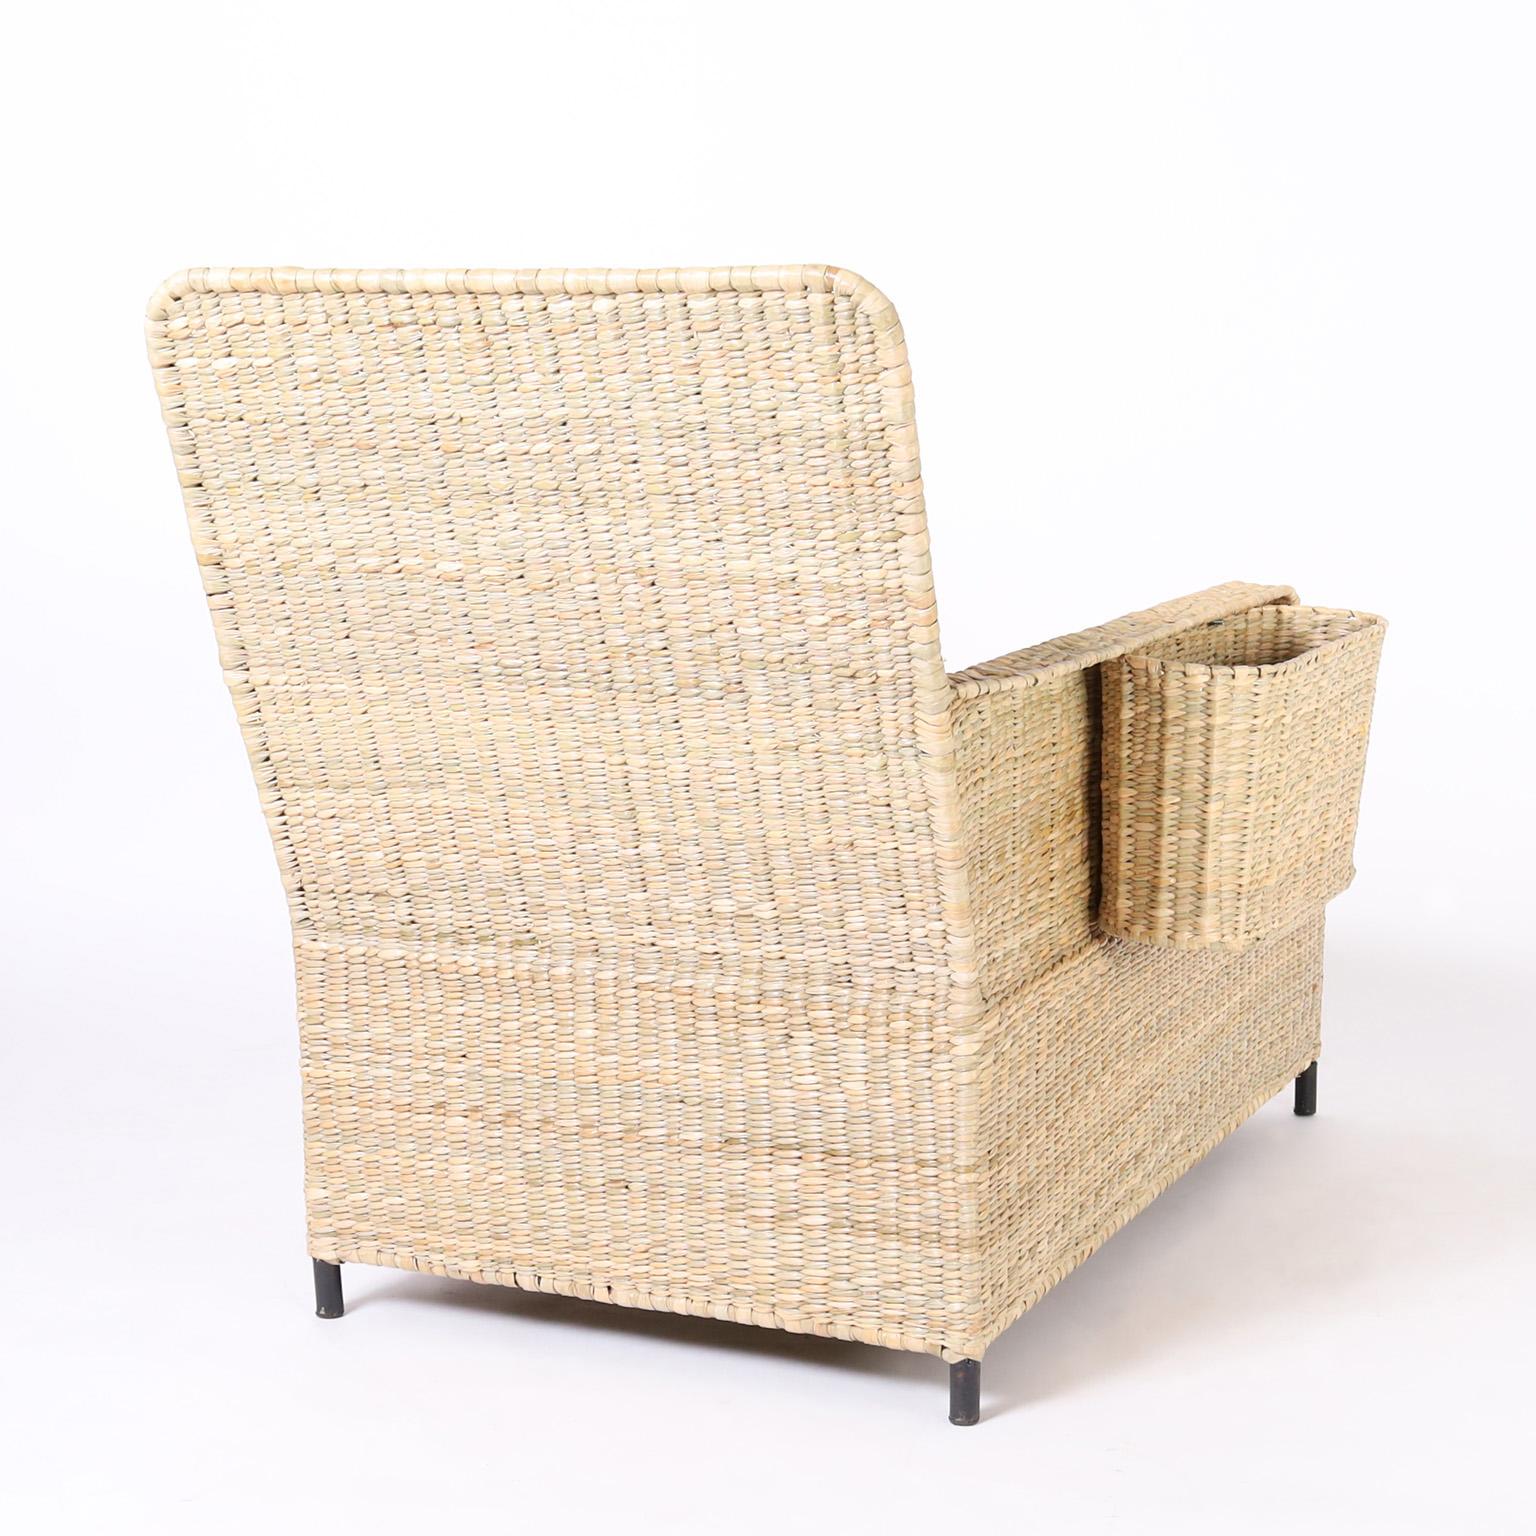 Contemporary The Palm Beach Chaise Lounge with Magazine Racks from the FS Flores Collection For Sale